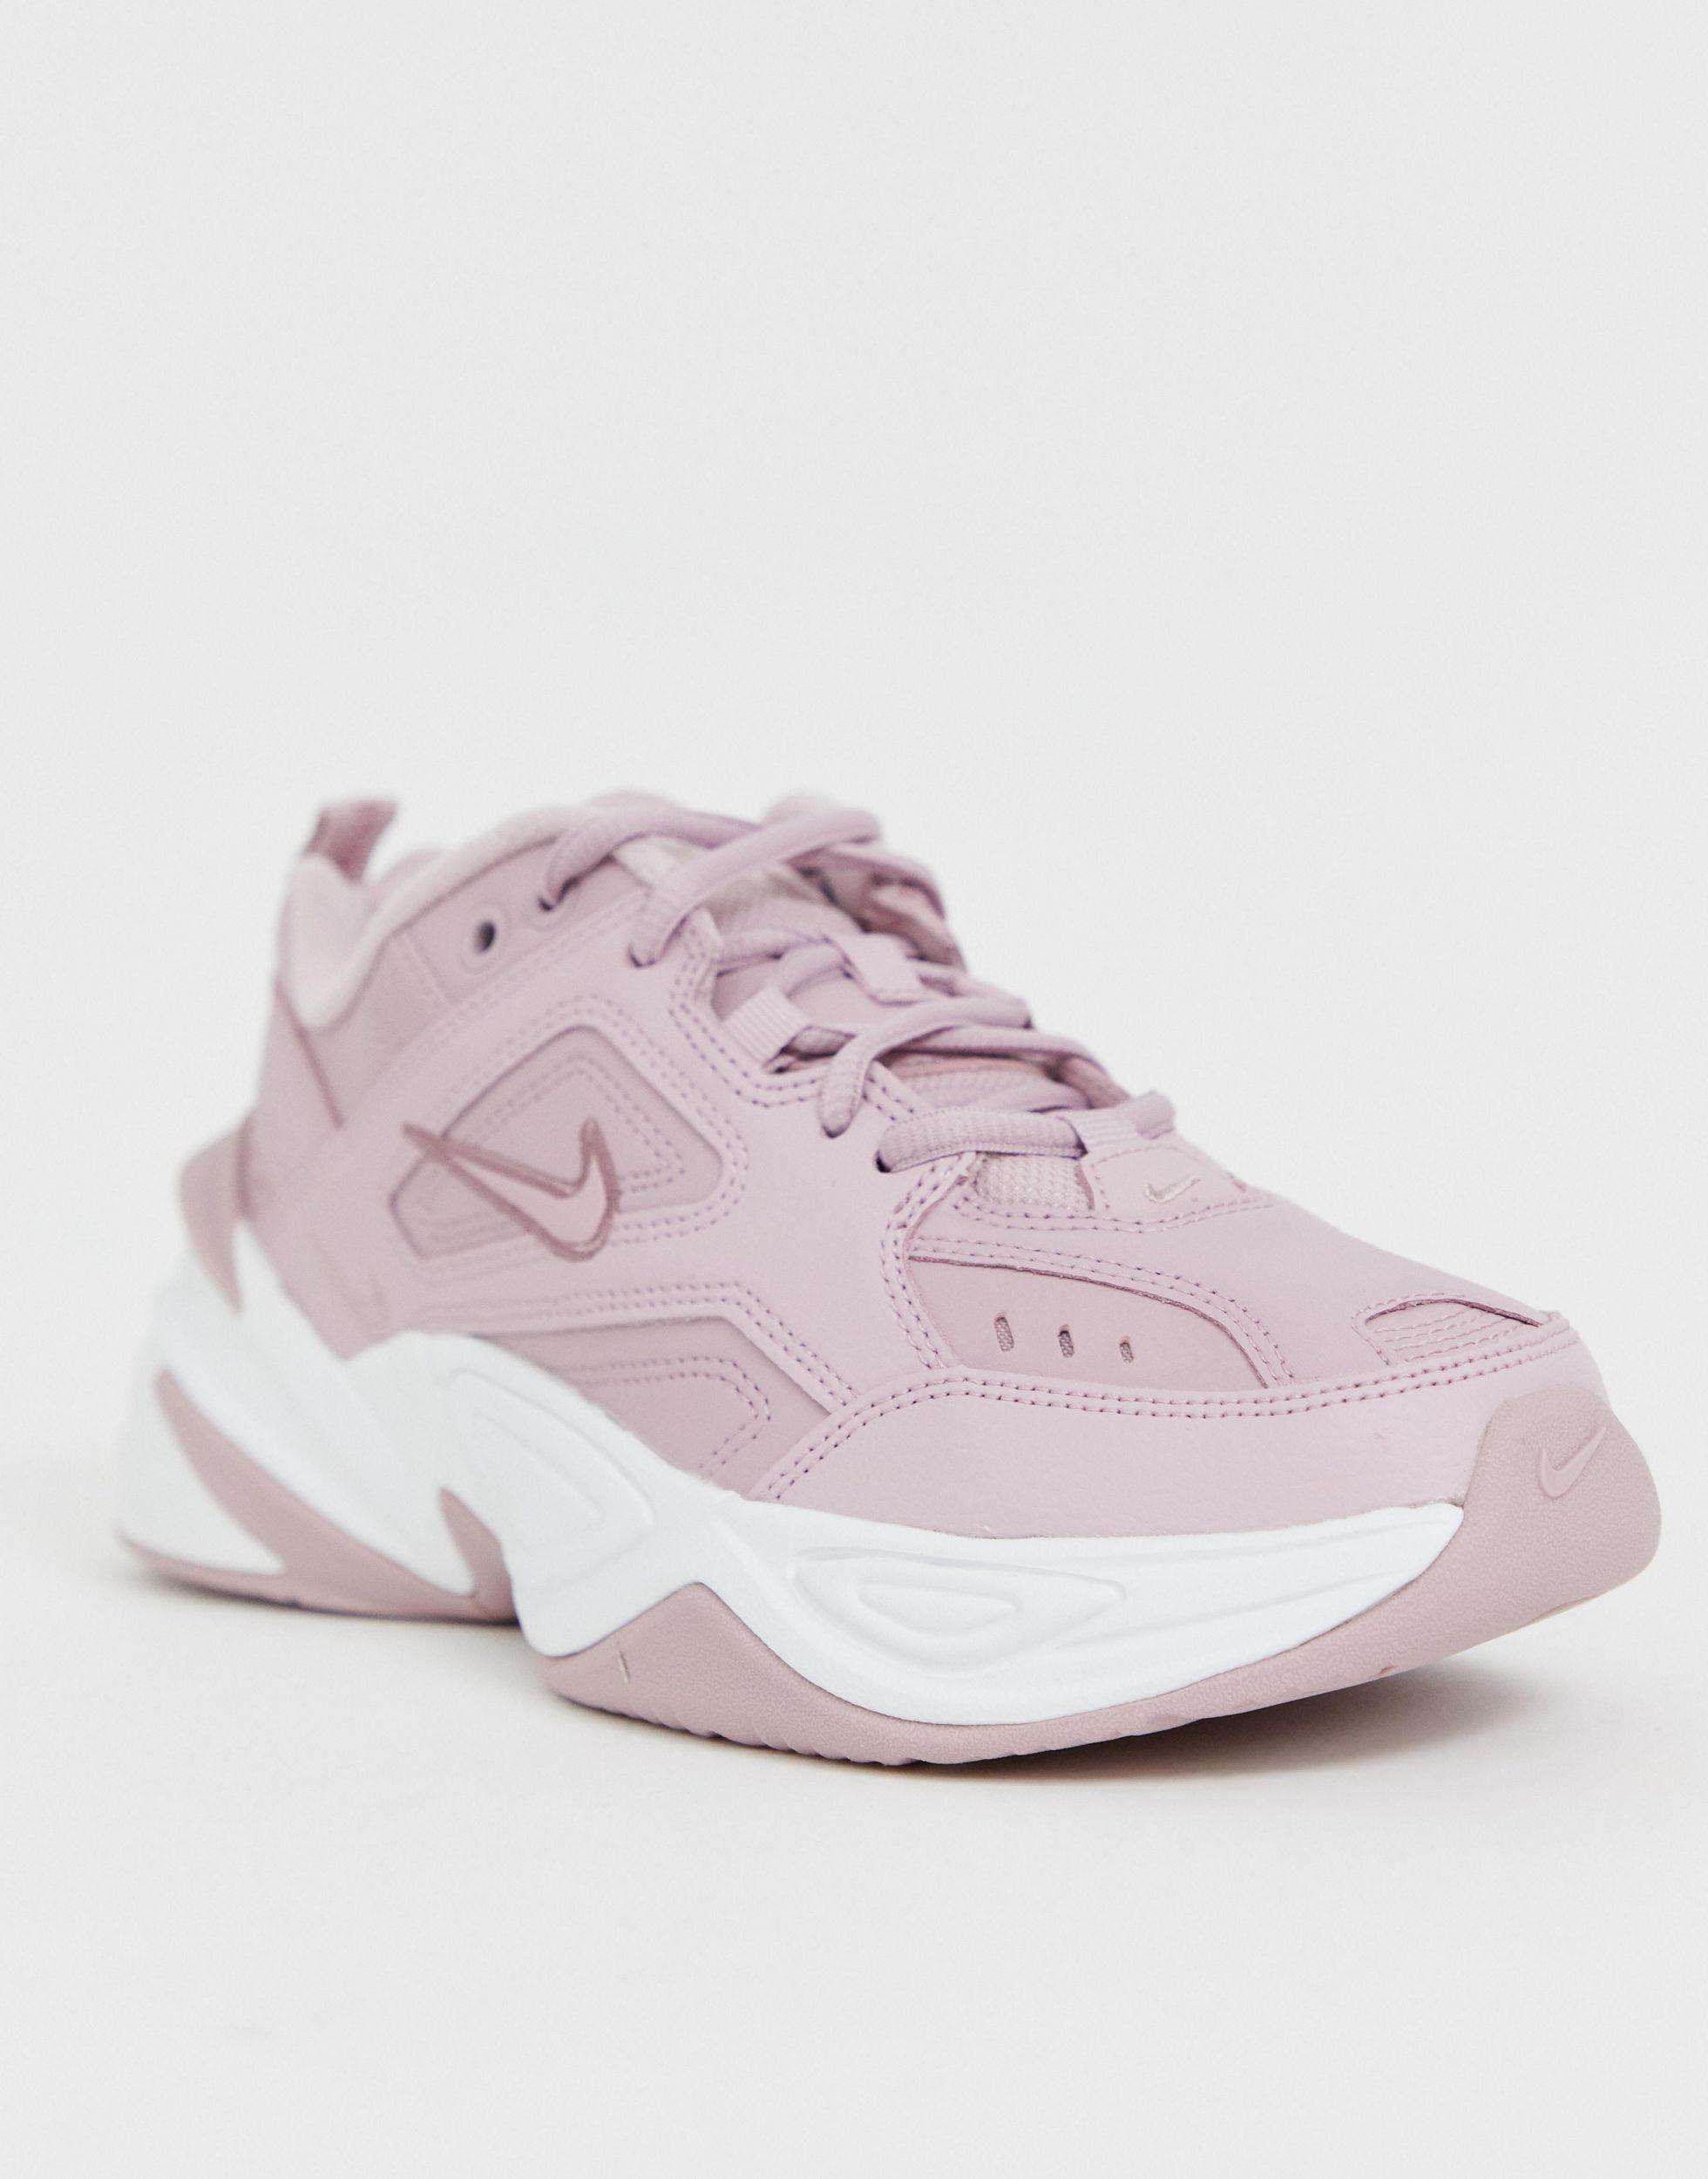 Nike Rubber M2k Tekno Trainers In Pink - Lyst